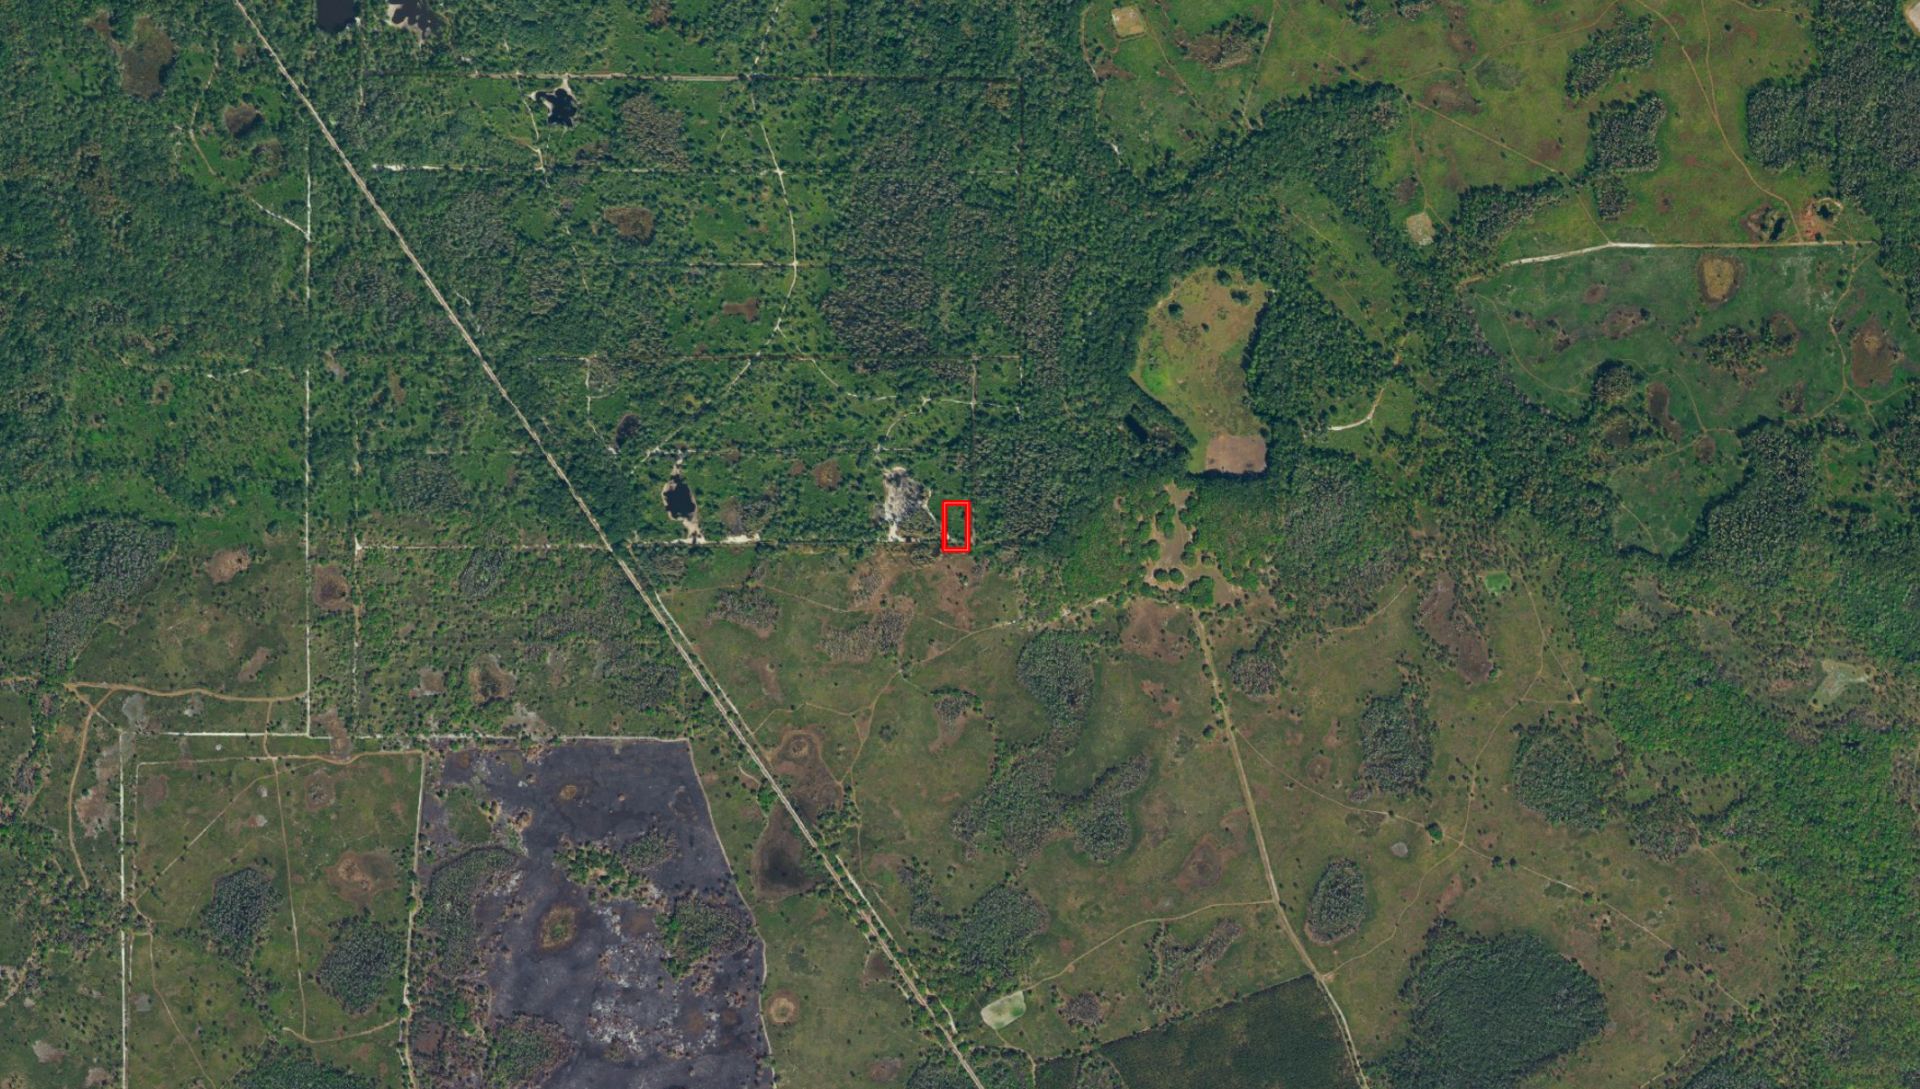 Diversify Your Land Investments: Secure 1.26 Acres in Florida! - Image 4 of 12